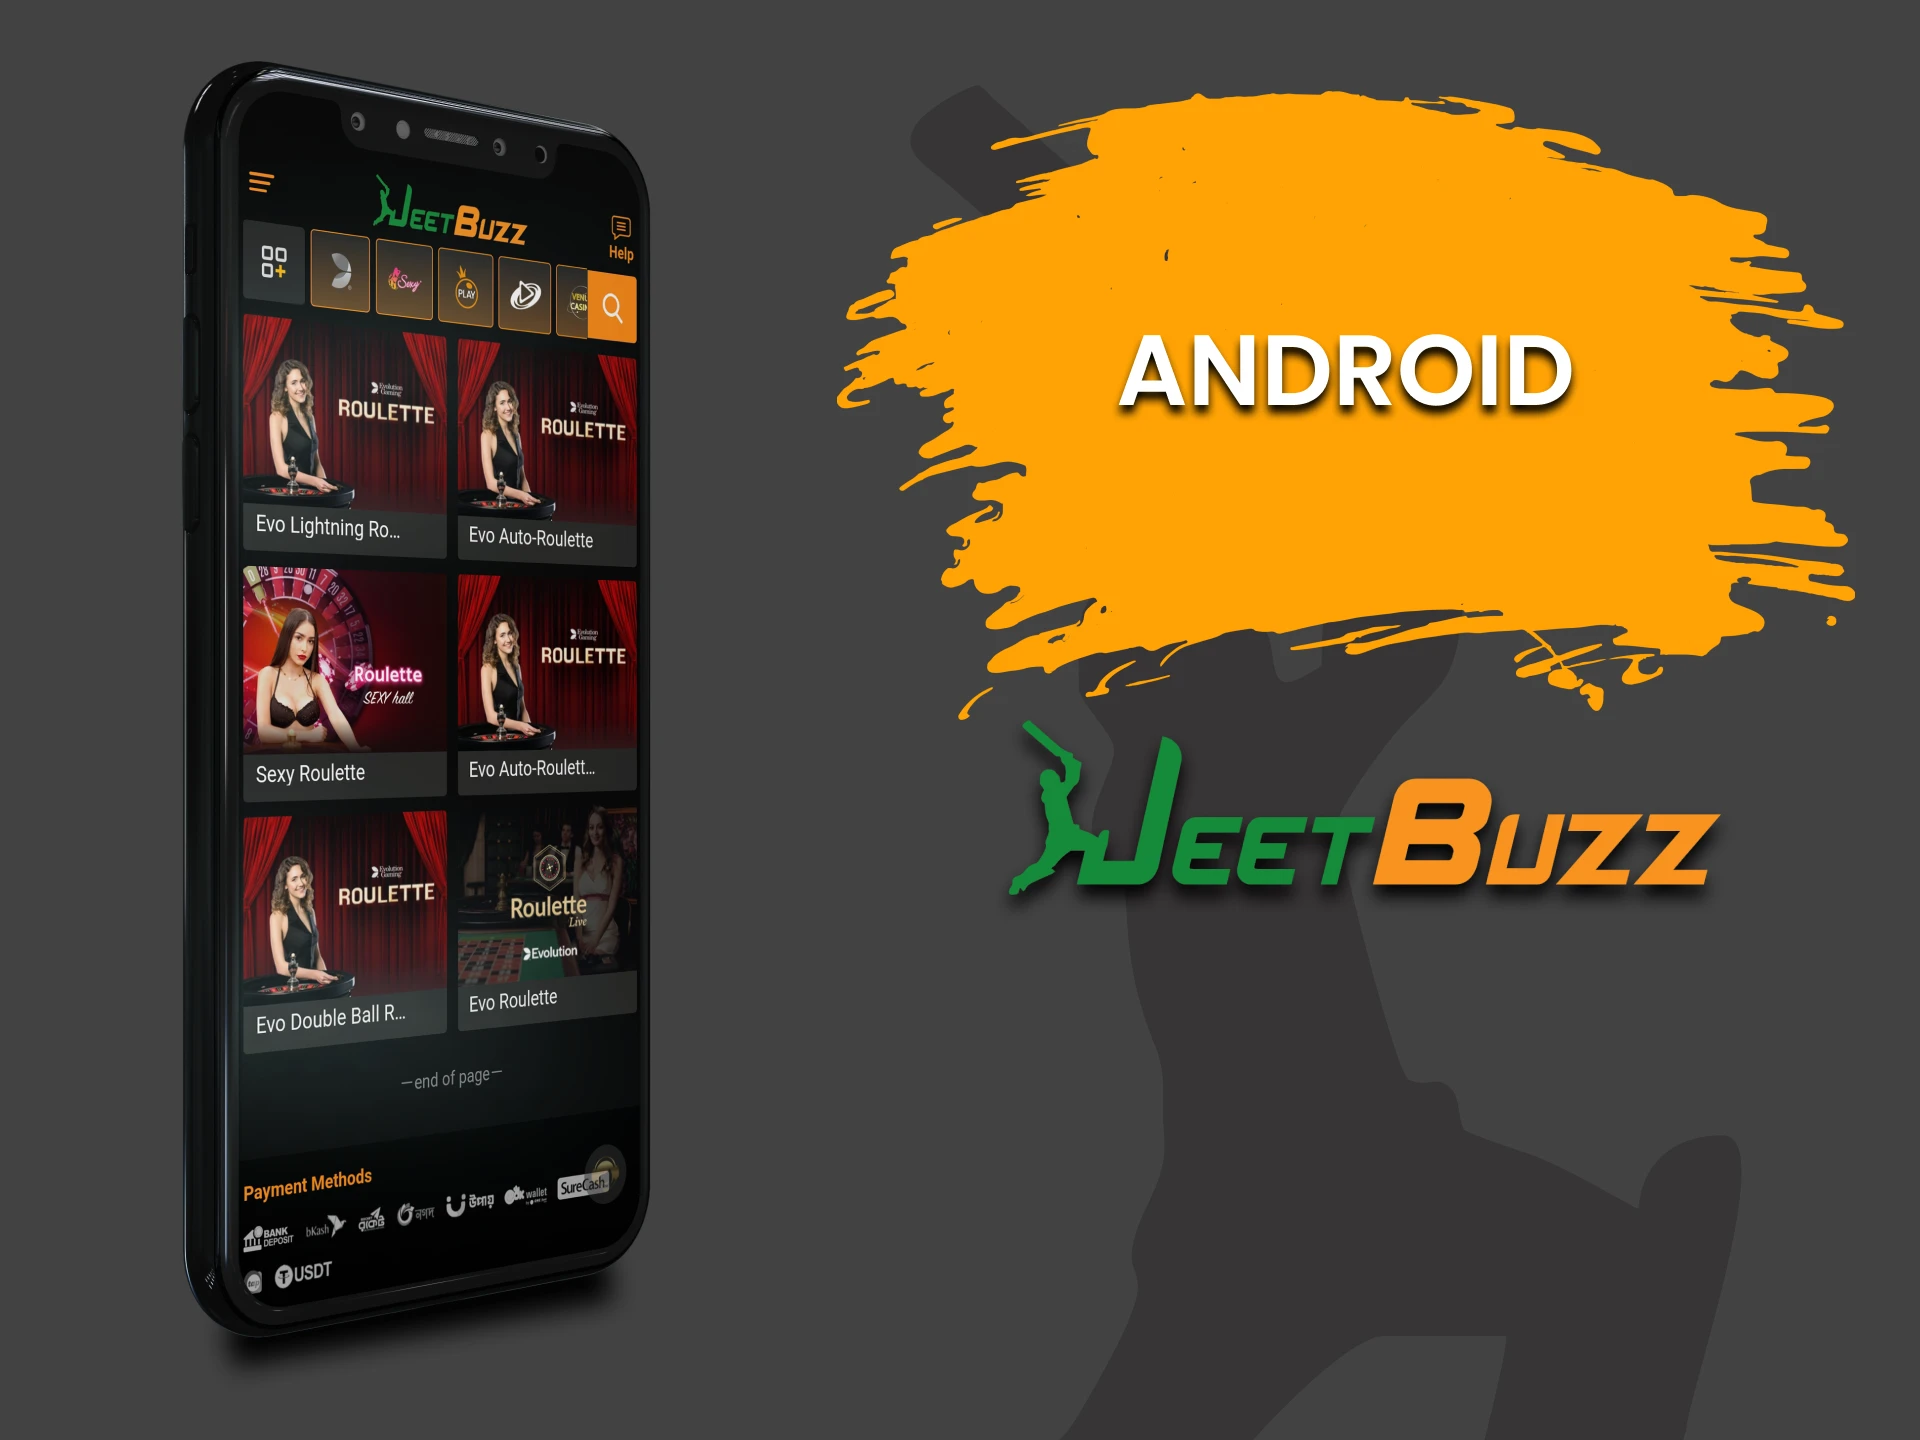 Download the JeetBuzz app to play Roulette on Android.